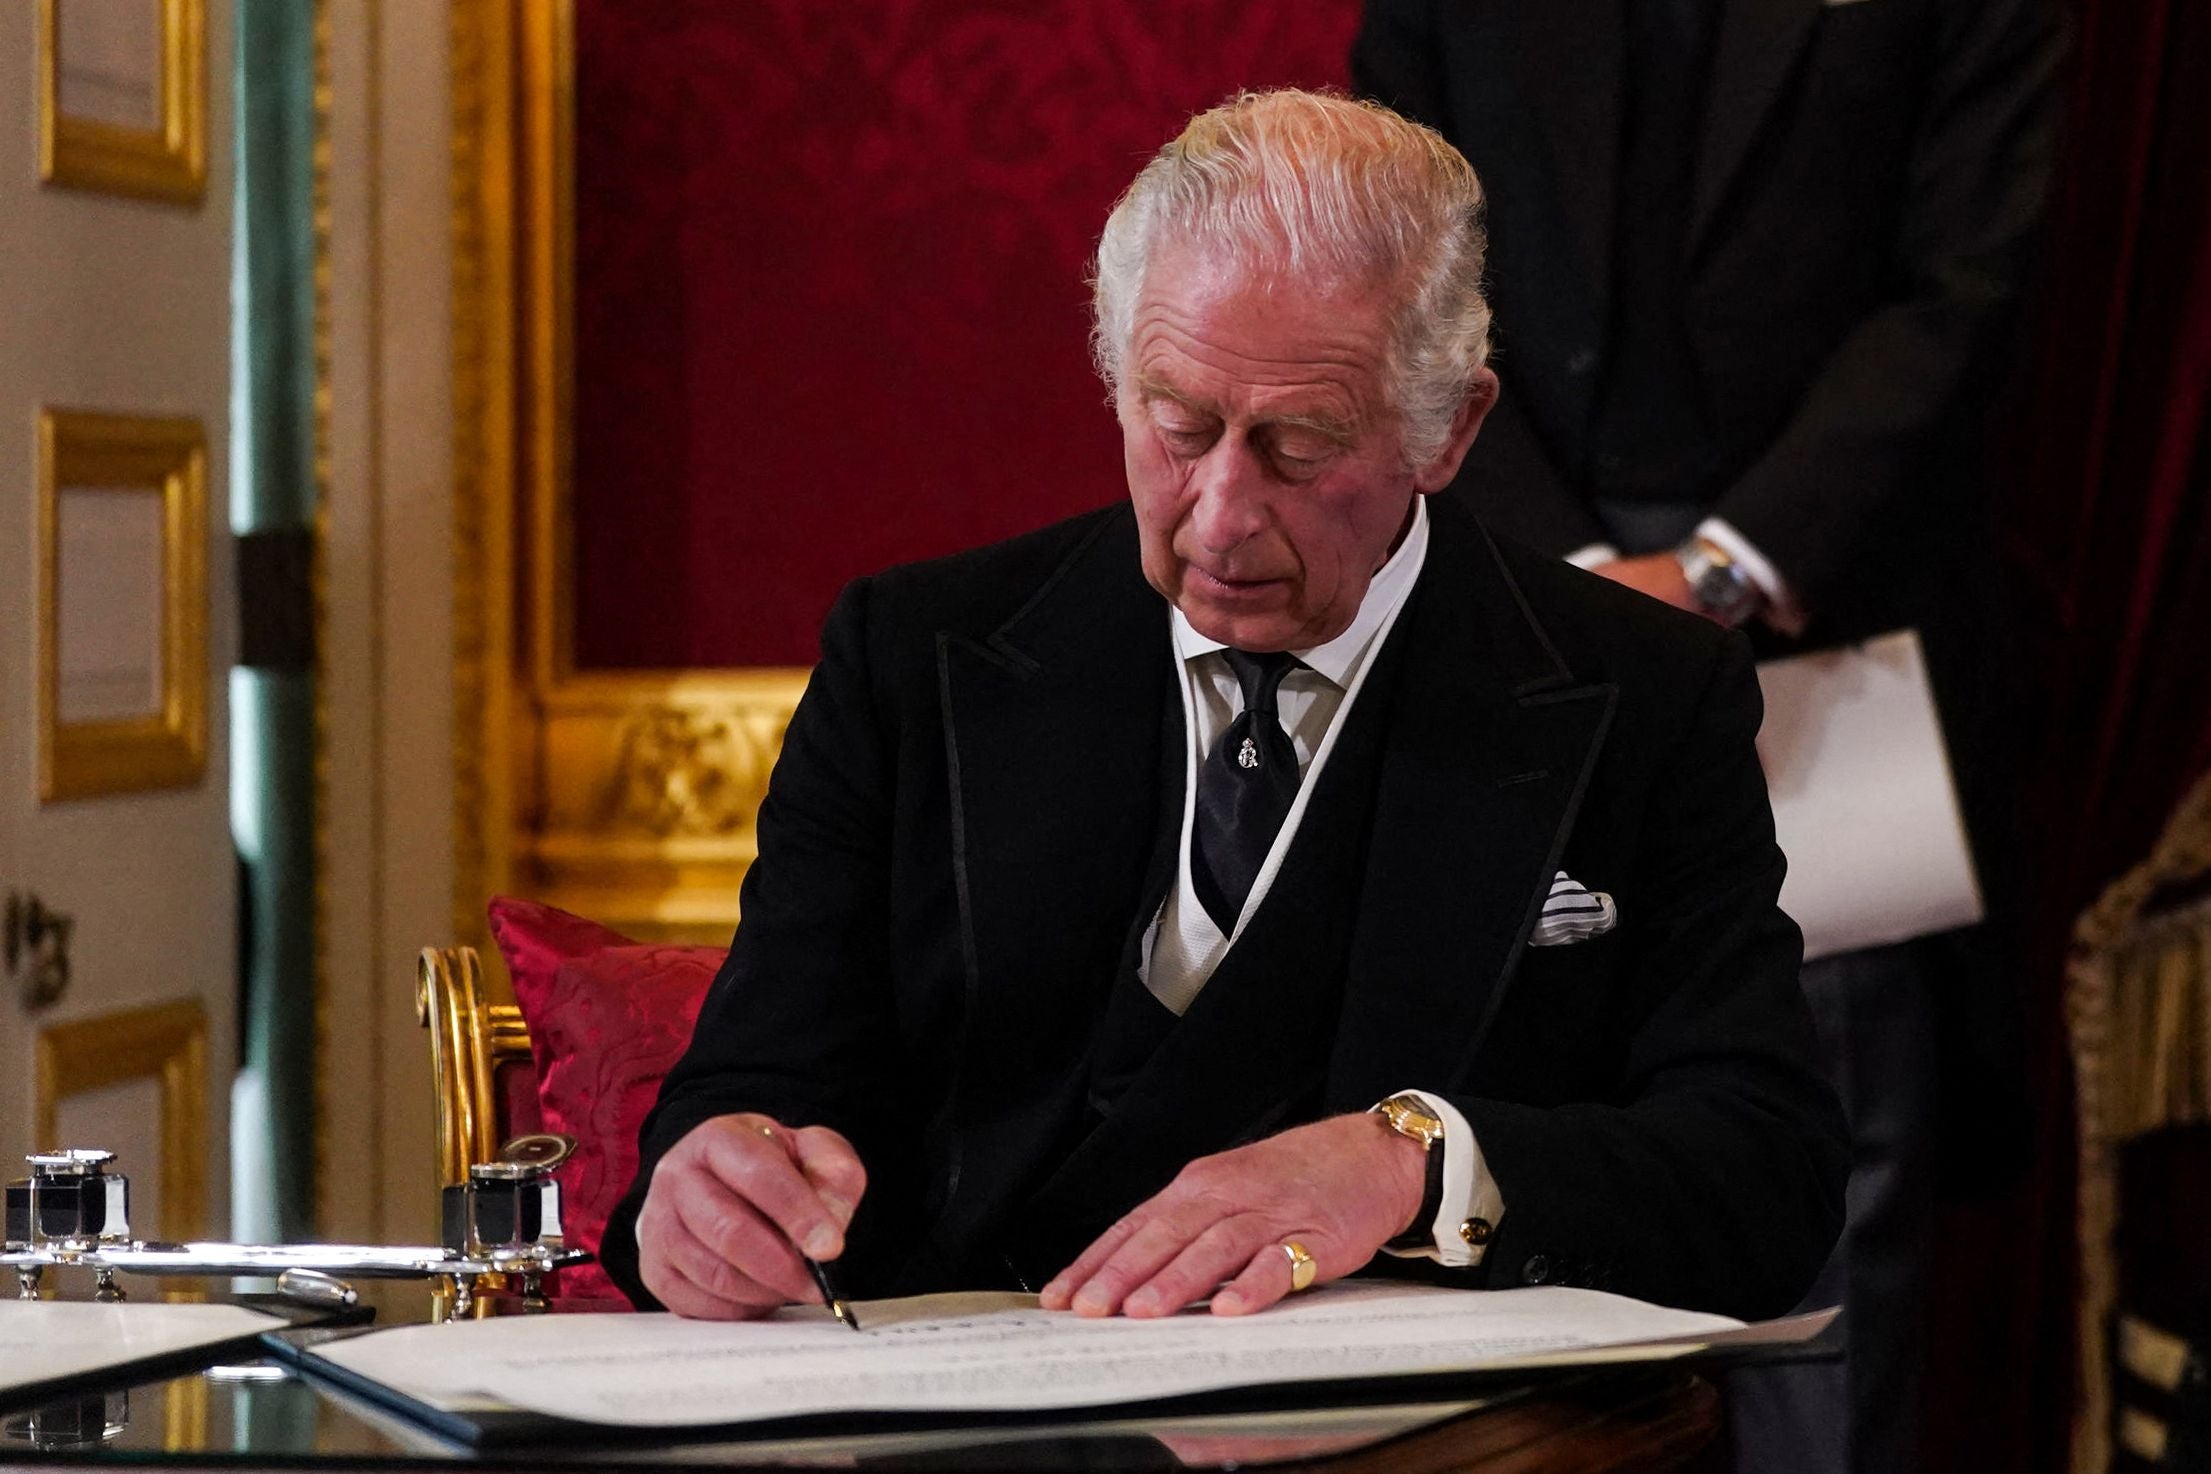 King Charles III was proclaimed king during the accession ceremony